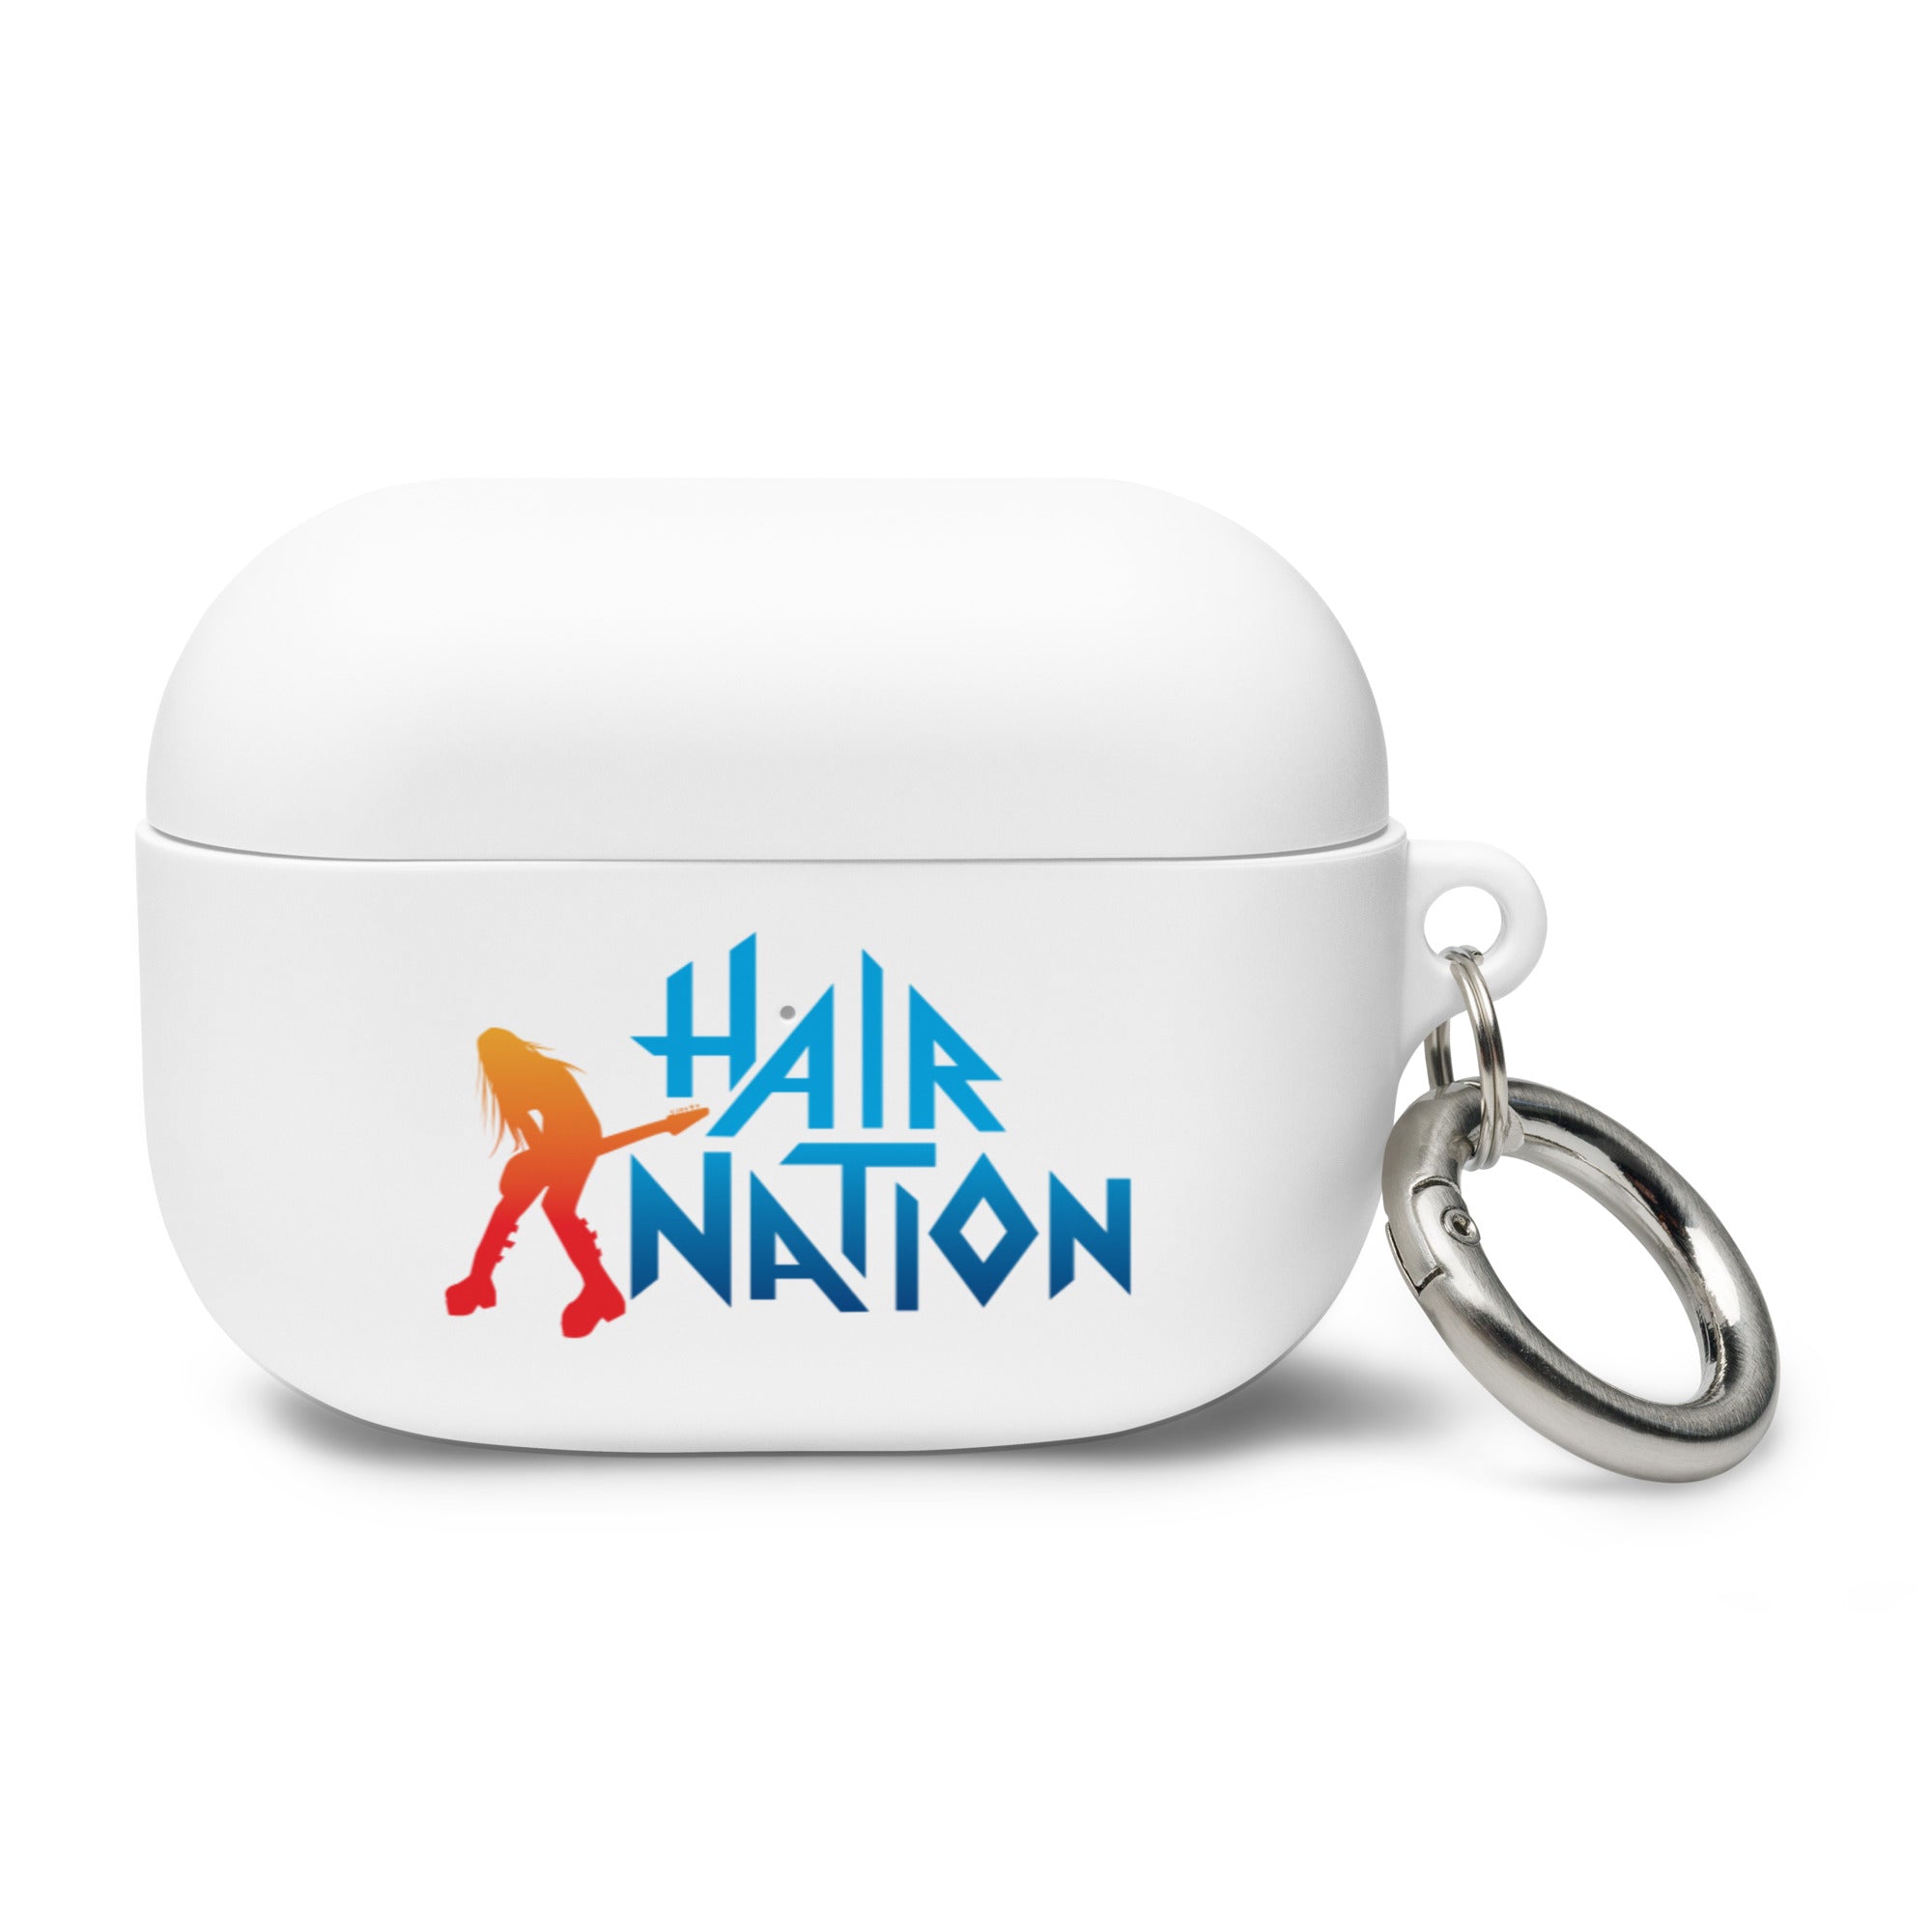 Hair Nation: AirPods® Case Cover